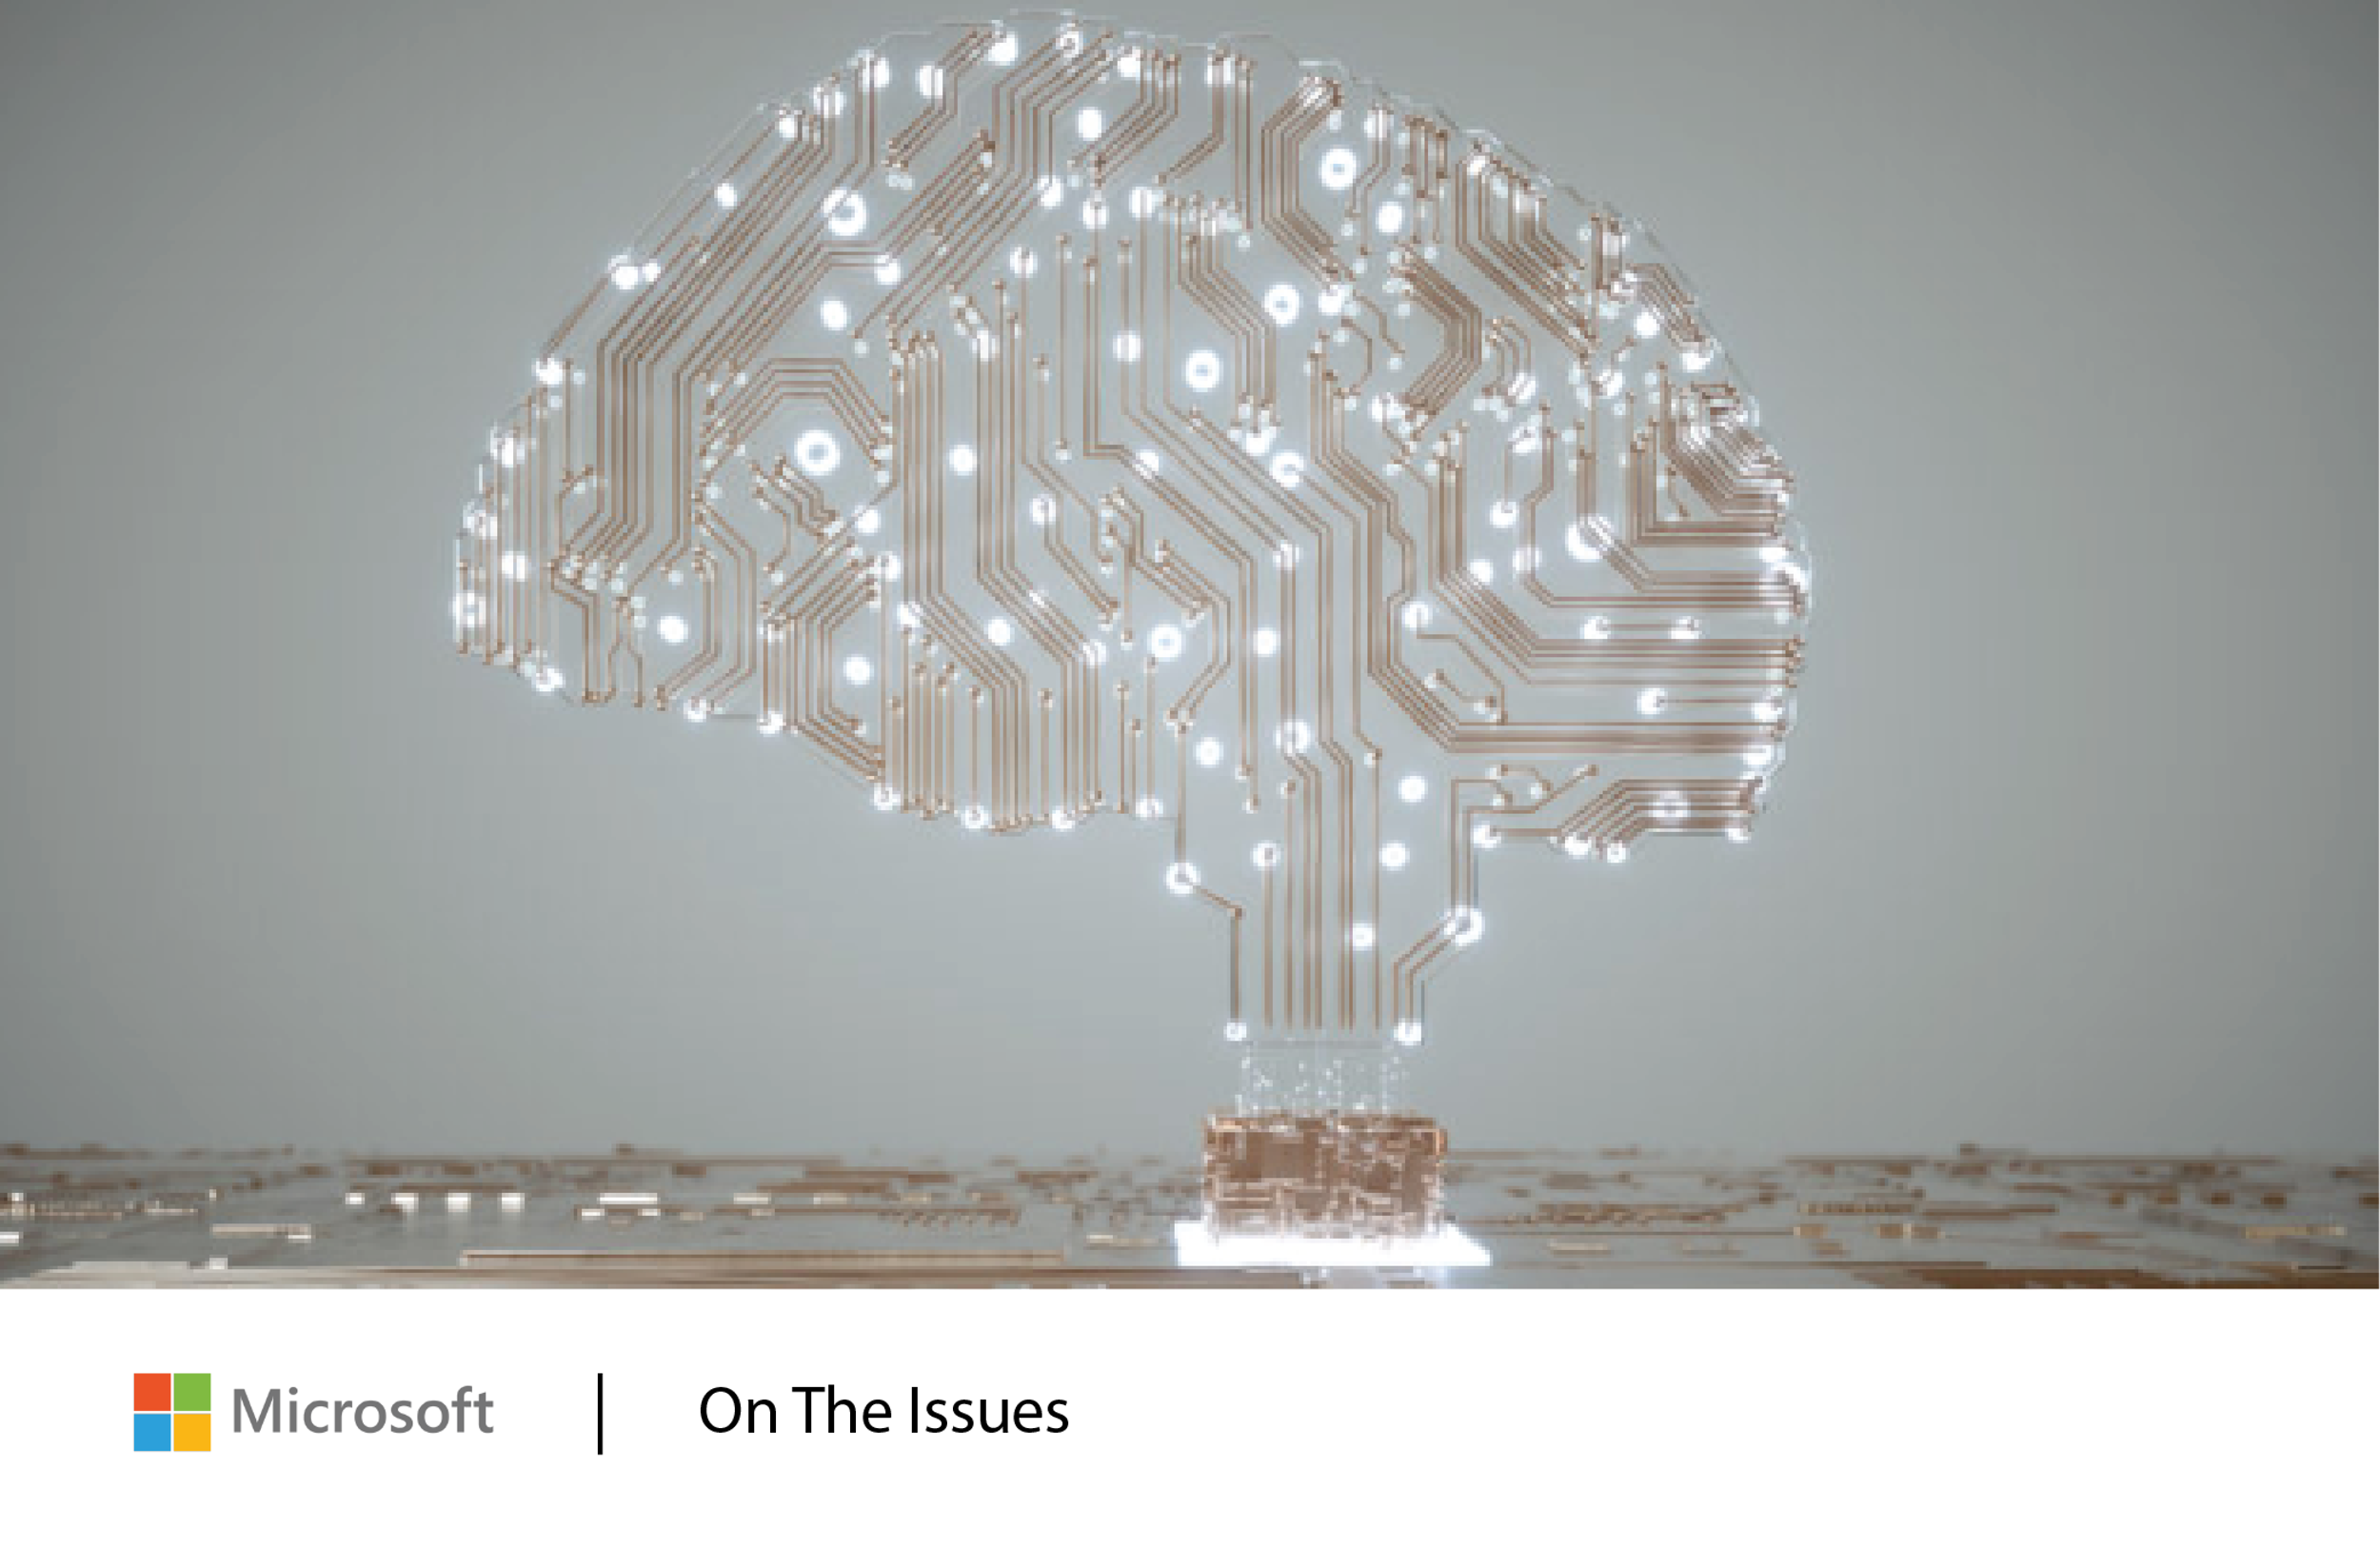 An abstract image of a brain with high tech neural connections. Get the latest from Microsoft on the most pressing policy issues.